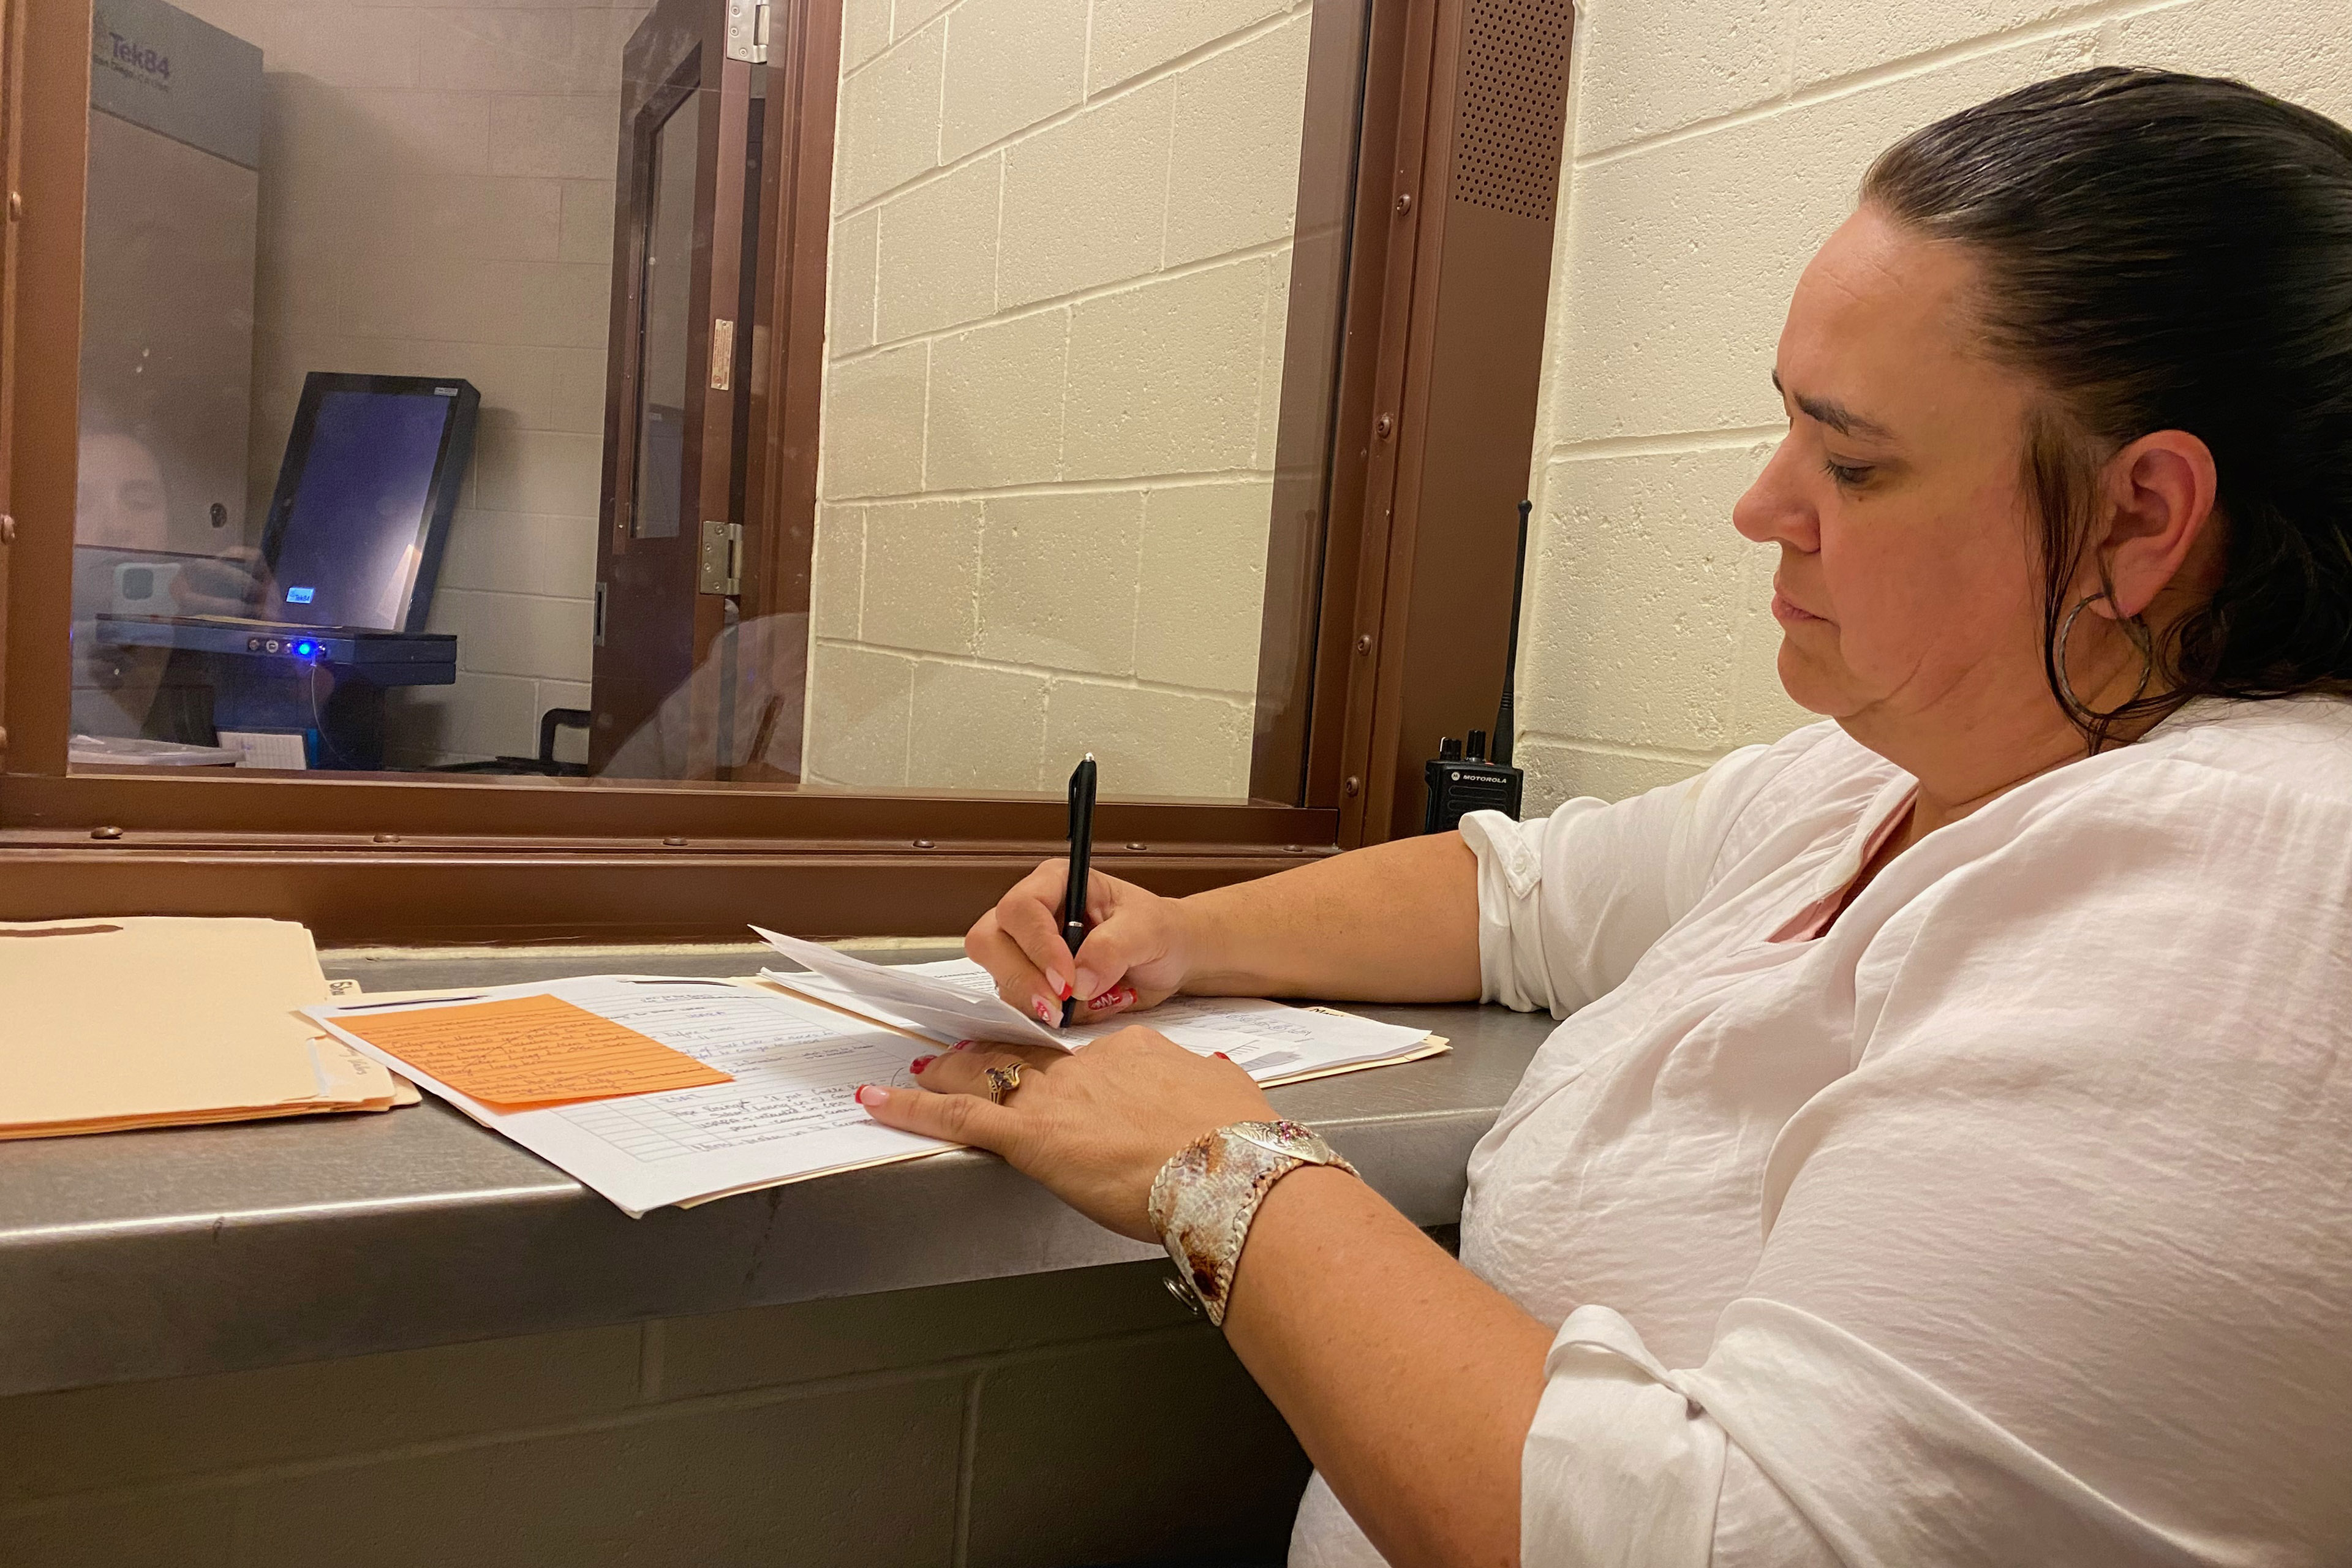 Cheryl Swapp, who is seated to the right of the frame, sits in a jail visitation room as she takes notes on standard size paper.